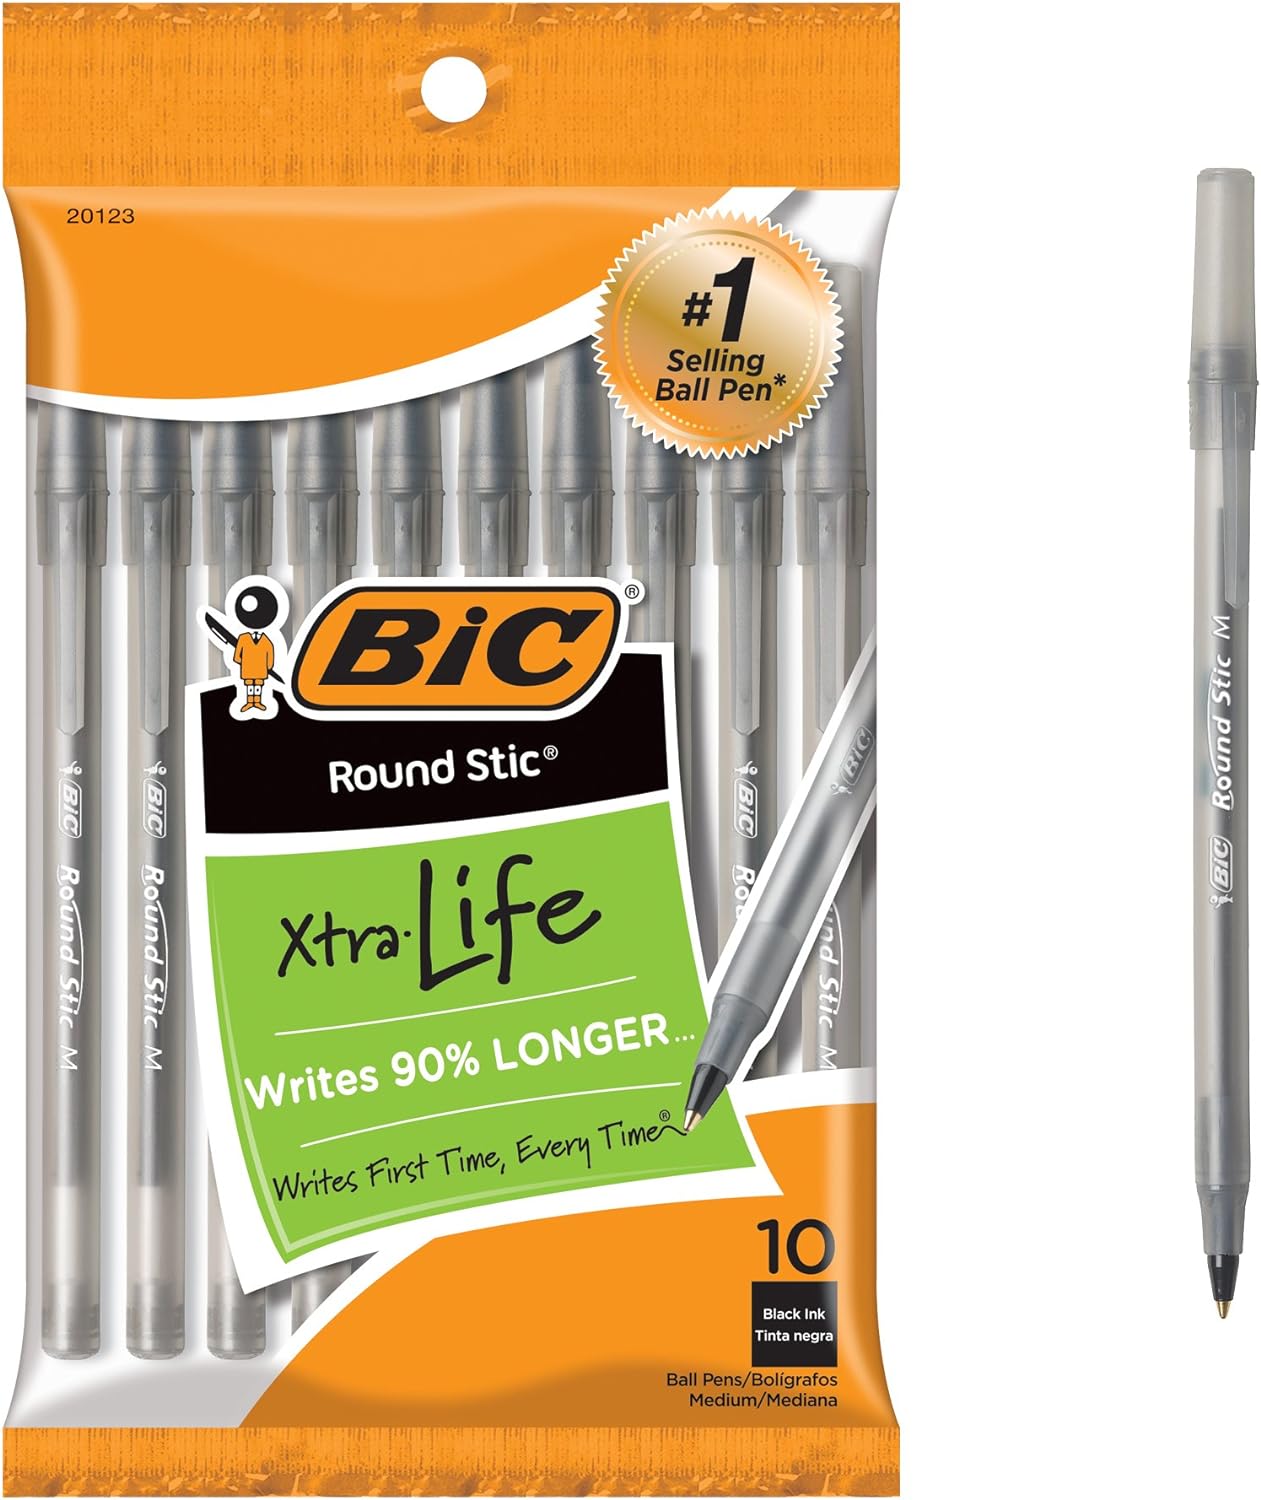 They are good ink pens, long lasting and cheap